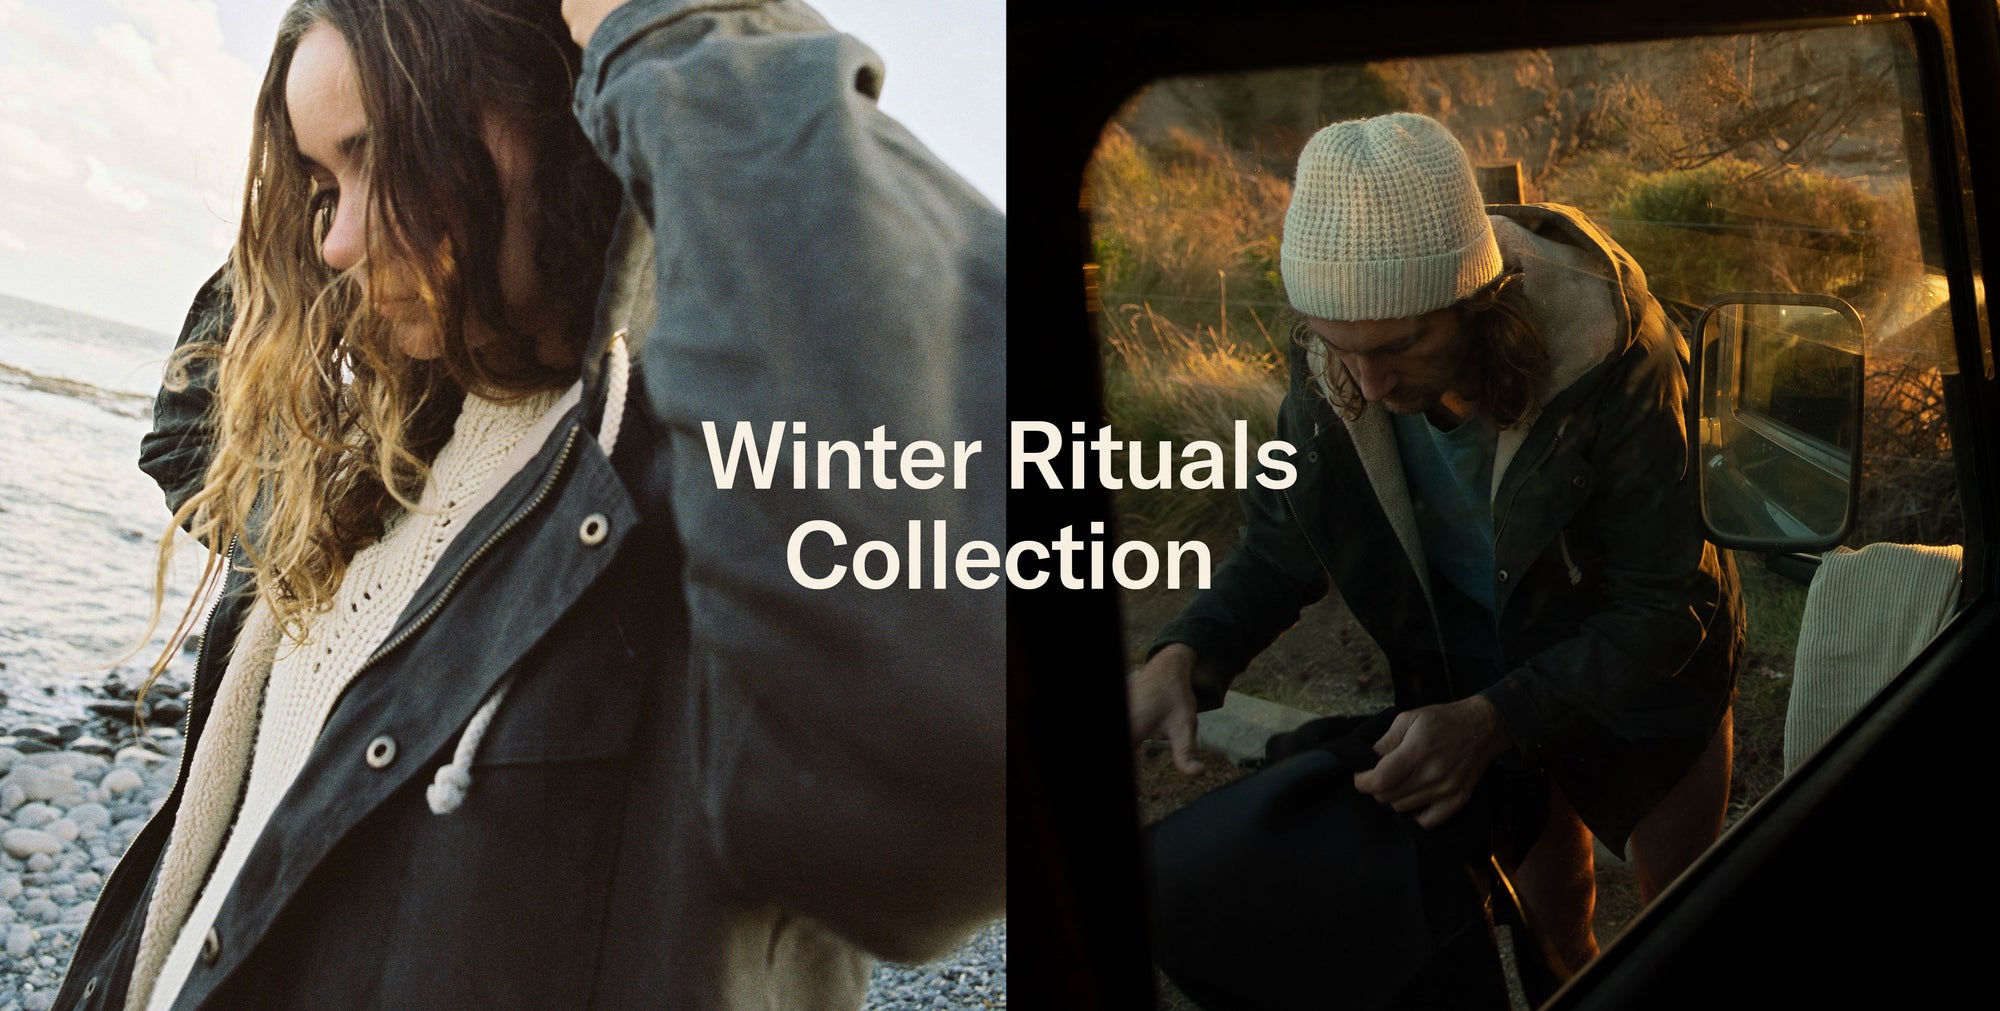 Winter Rituals Collection